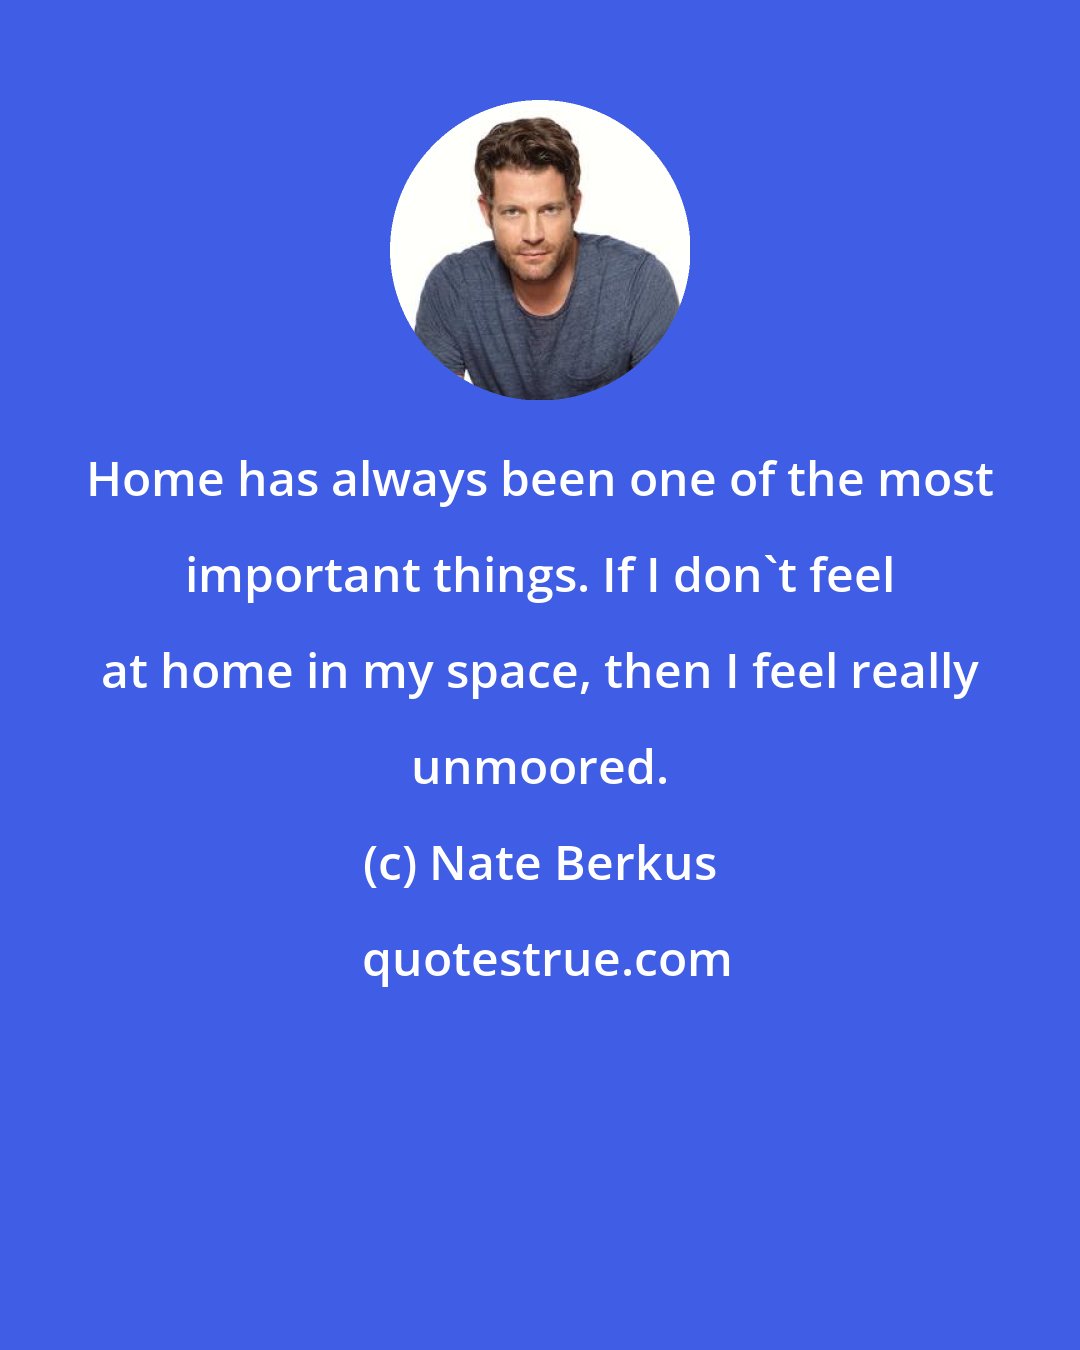 Nate Berkus: Home has always been one of the most important things. If I don't feel at home in my space, then I feel really unmoored.